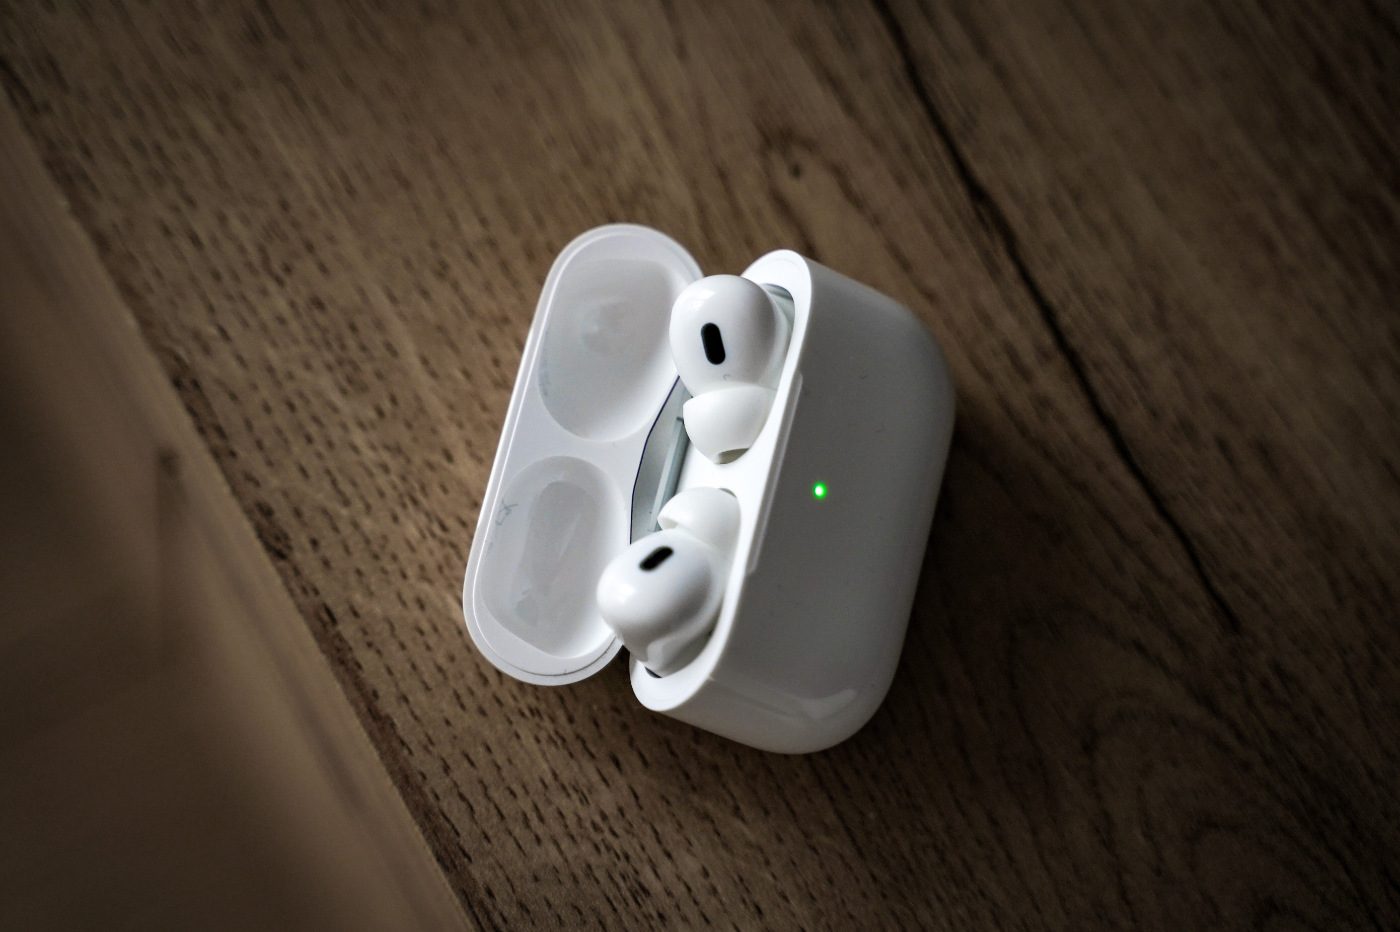 2nd Generation AirPods Pro